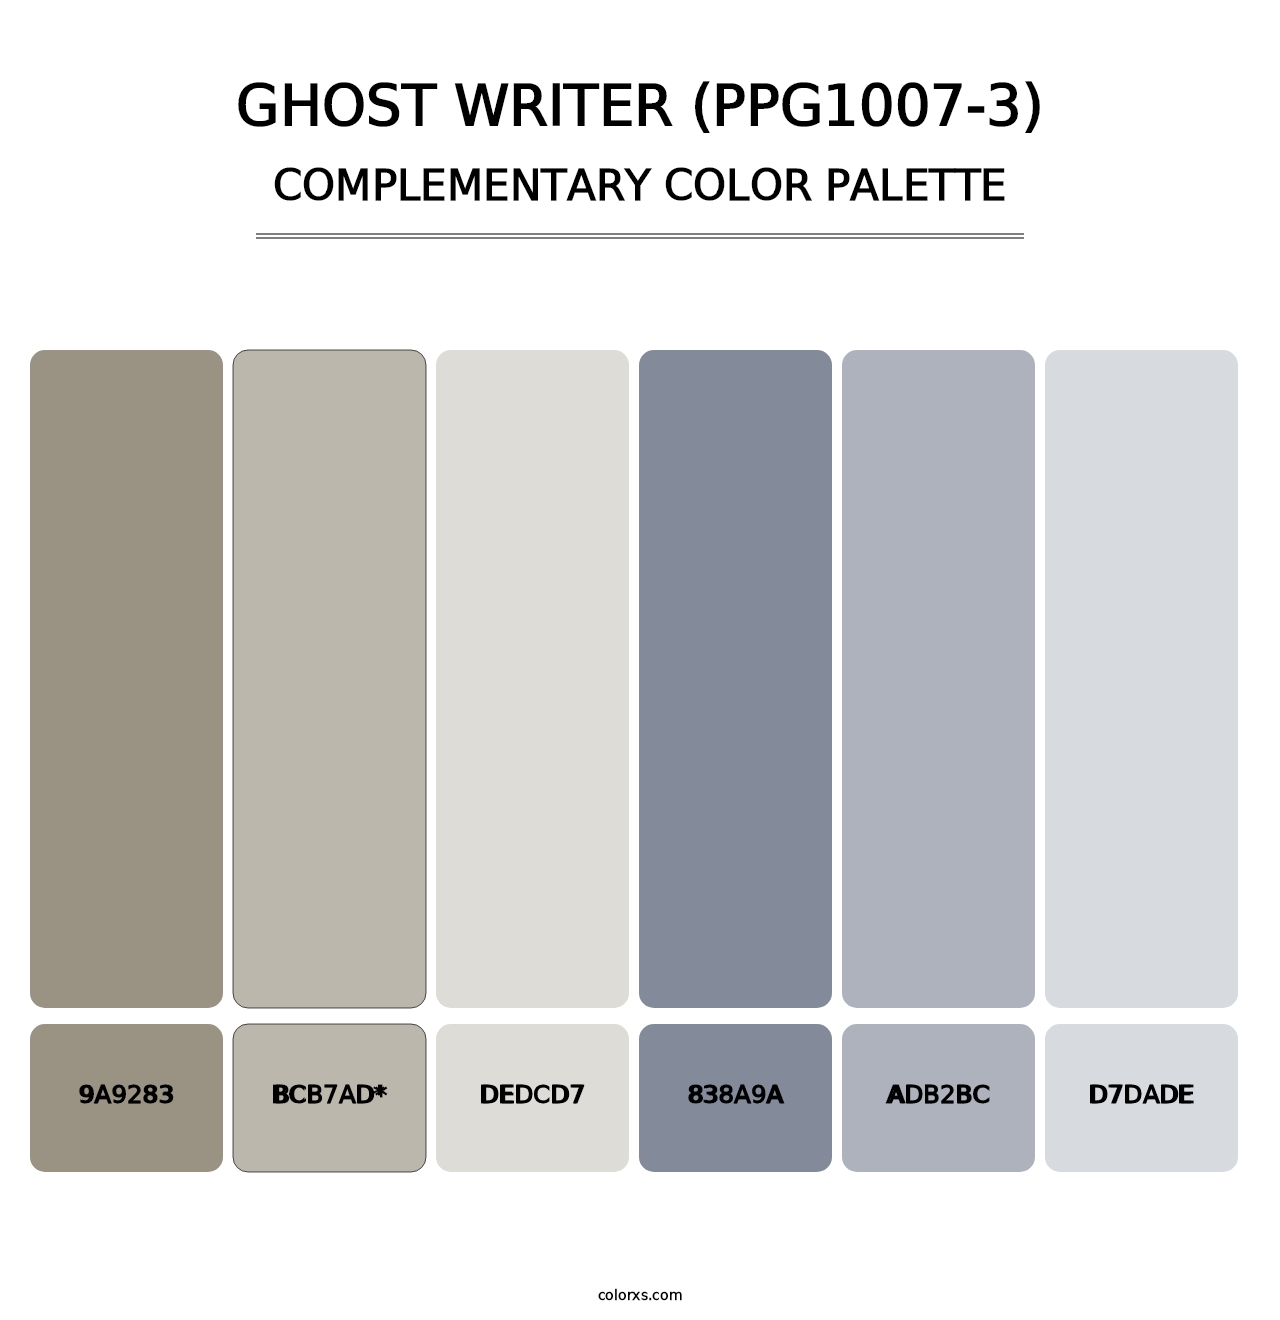 Ghost Writer (PPG1007-3) - Complementary Color Palette